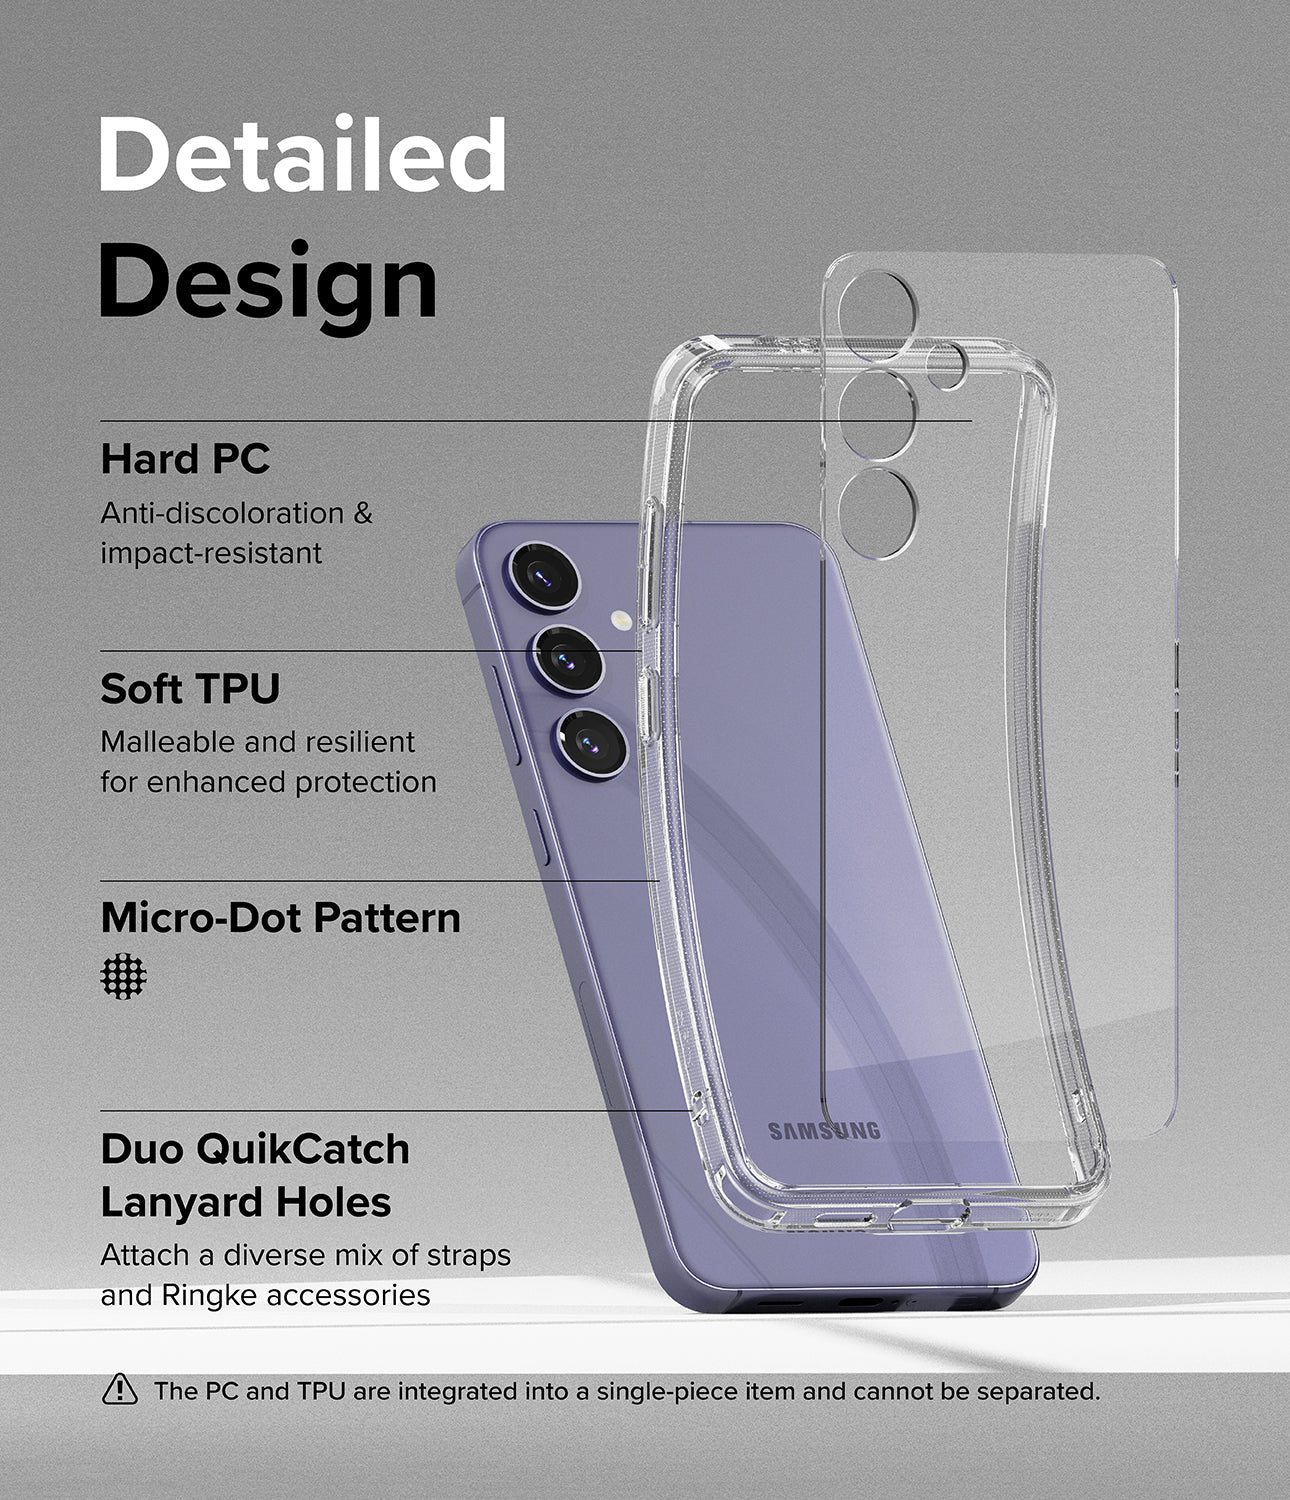 Galaxy S24 Case | Fusion - Detailed Design. Anti-discoloration and impact-resistant with Hard PC. Malleable and resilient for enhanced protection with Soft TPU. Micro-Dot Pattern. Duo QuikCatch Lanyard Holes to attach a diverse mix of straps and Ringke accessories.